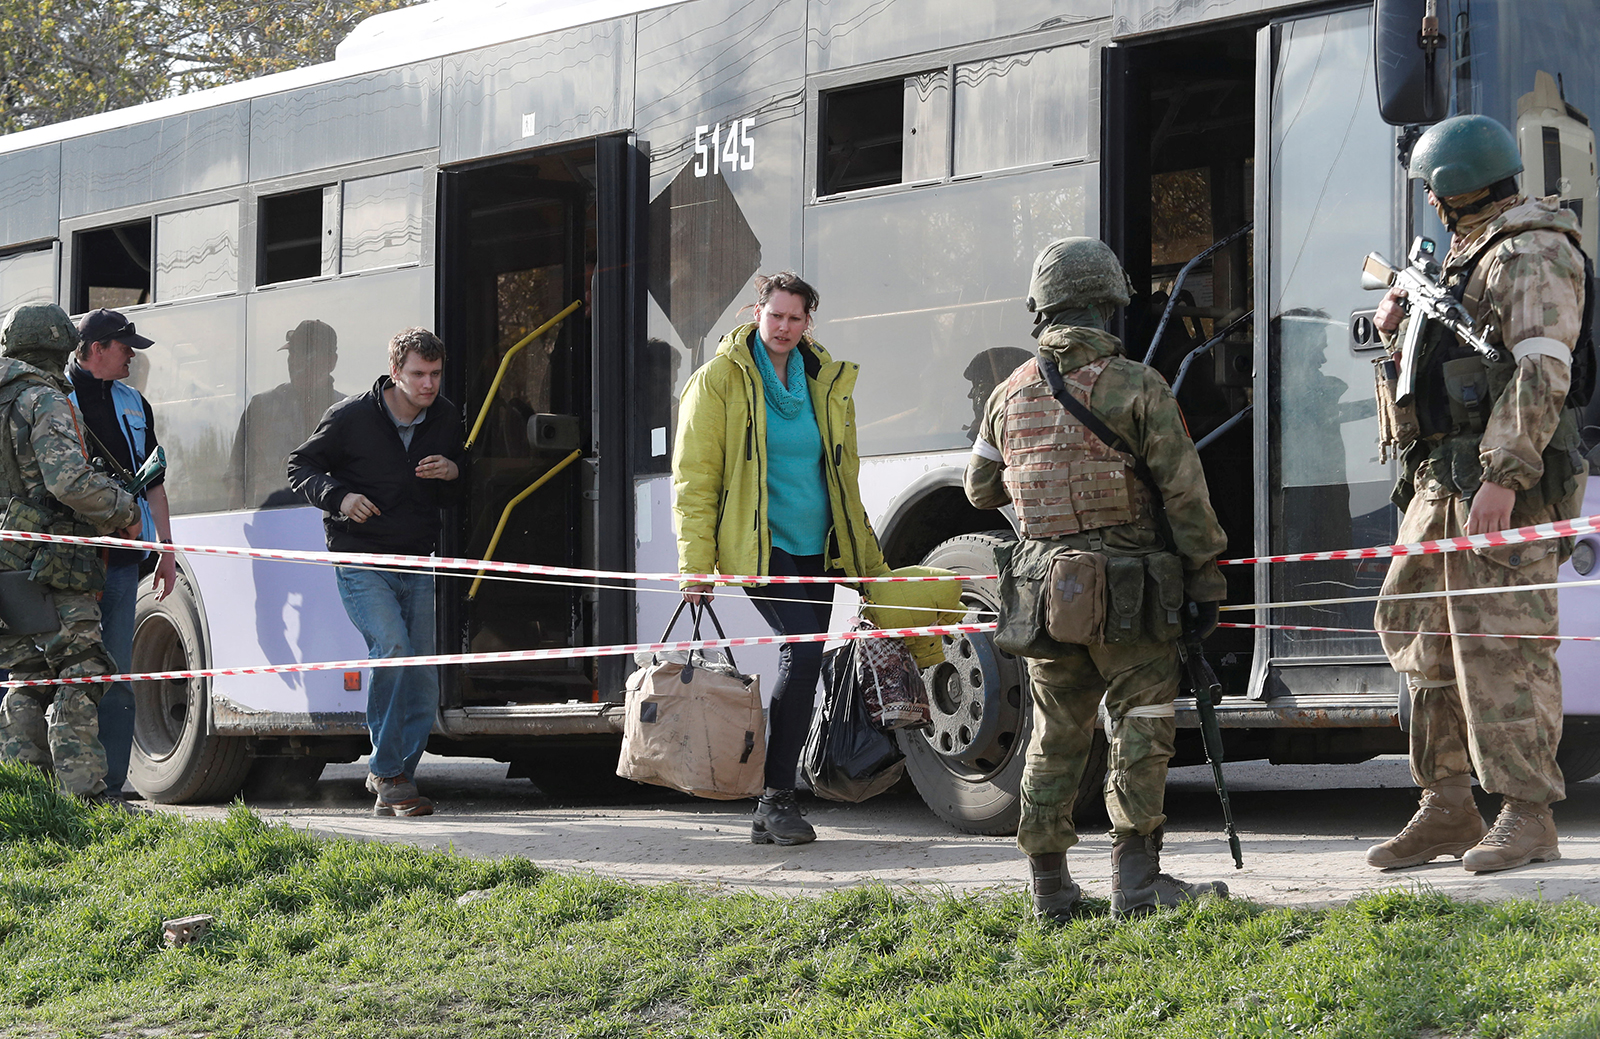 Azovstal steelworks worker Natalia Usmanova, 37, who was evacuated from Mariupol, arrives at a temporary accommodation center during the conflict between Ukraine and Russia in the village of Bezimenne in the Donetsk region of Ukraine on May 1.